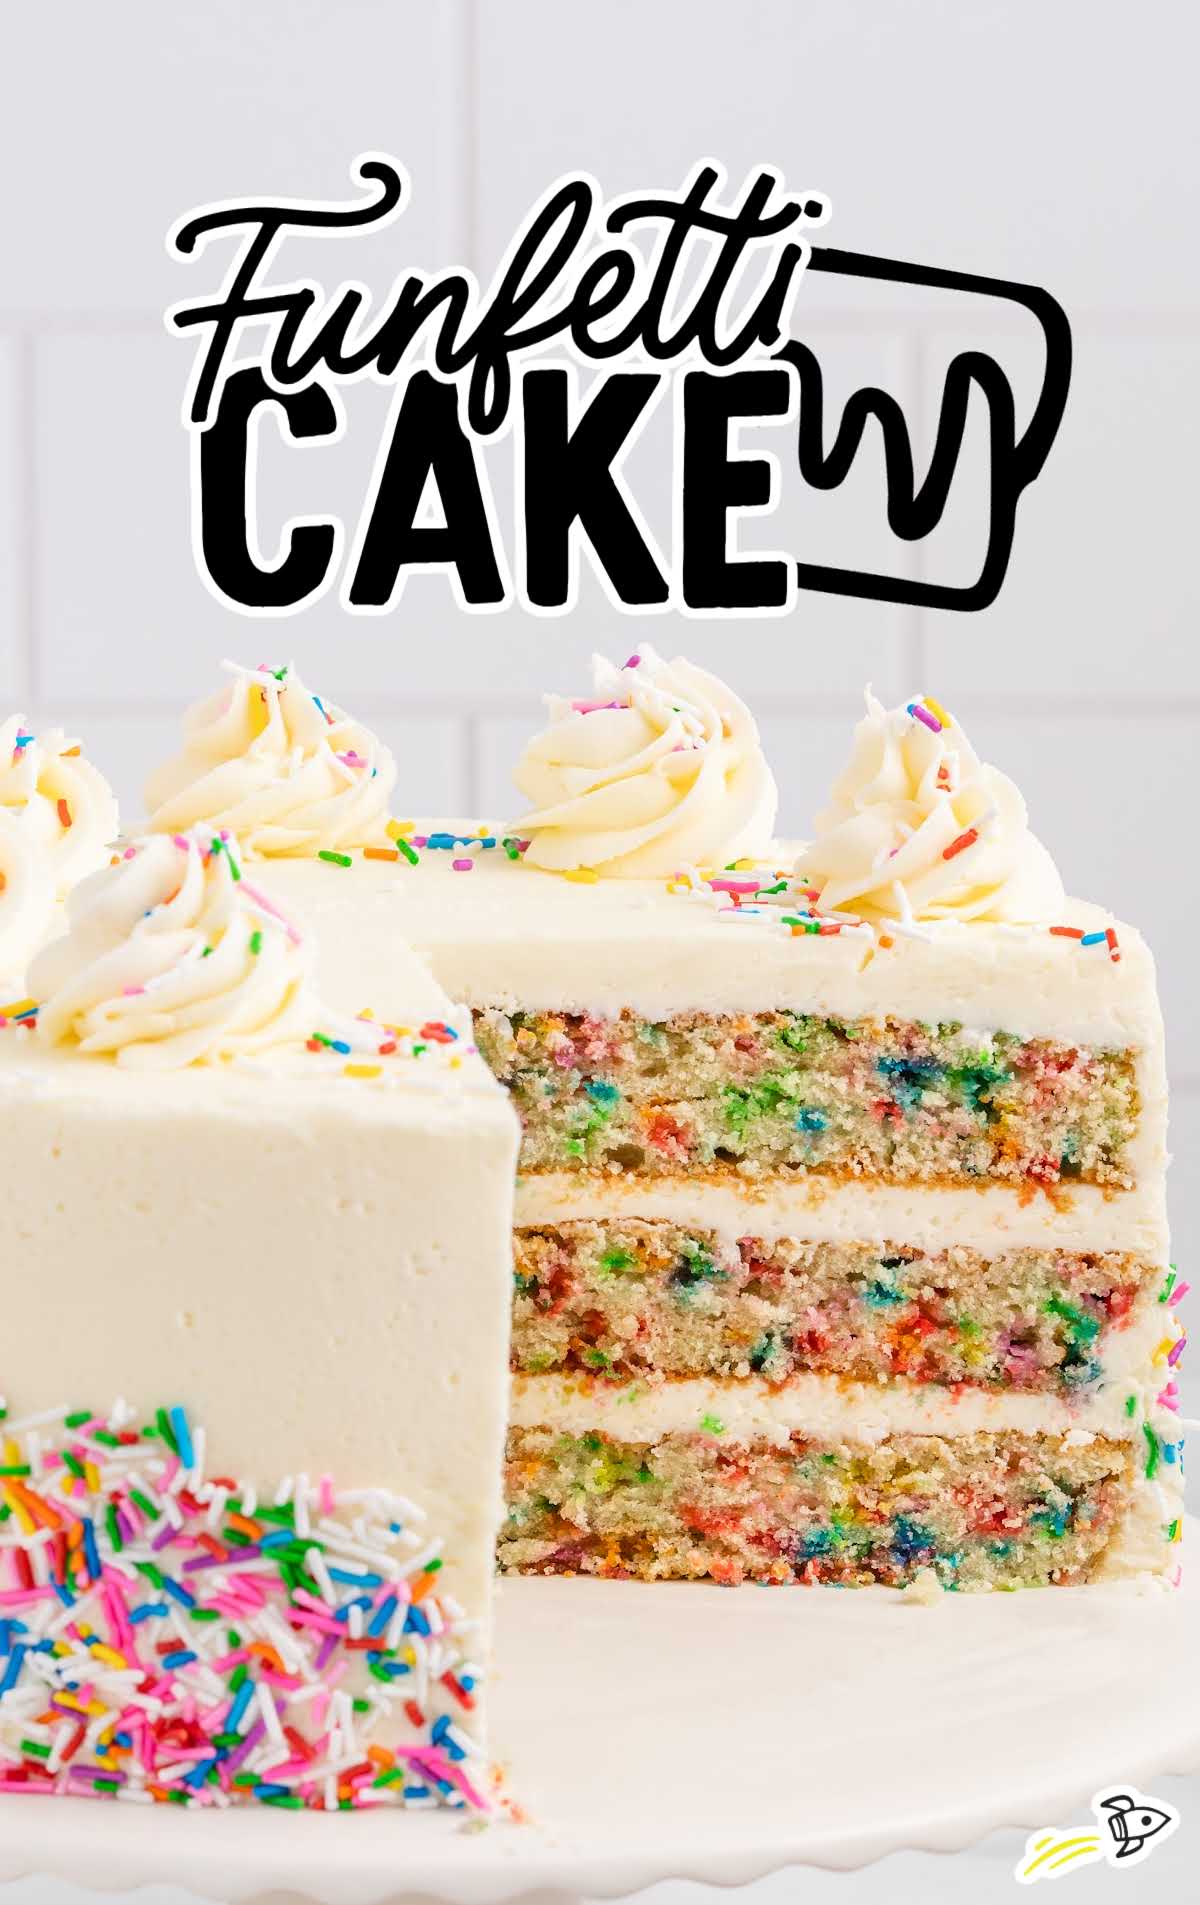 Funfetti Cake on a cake stand with a slice taken out of it